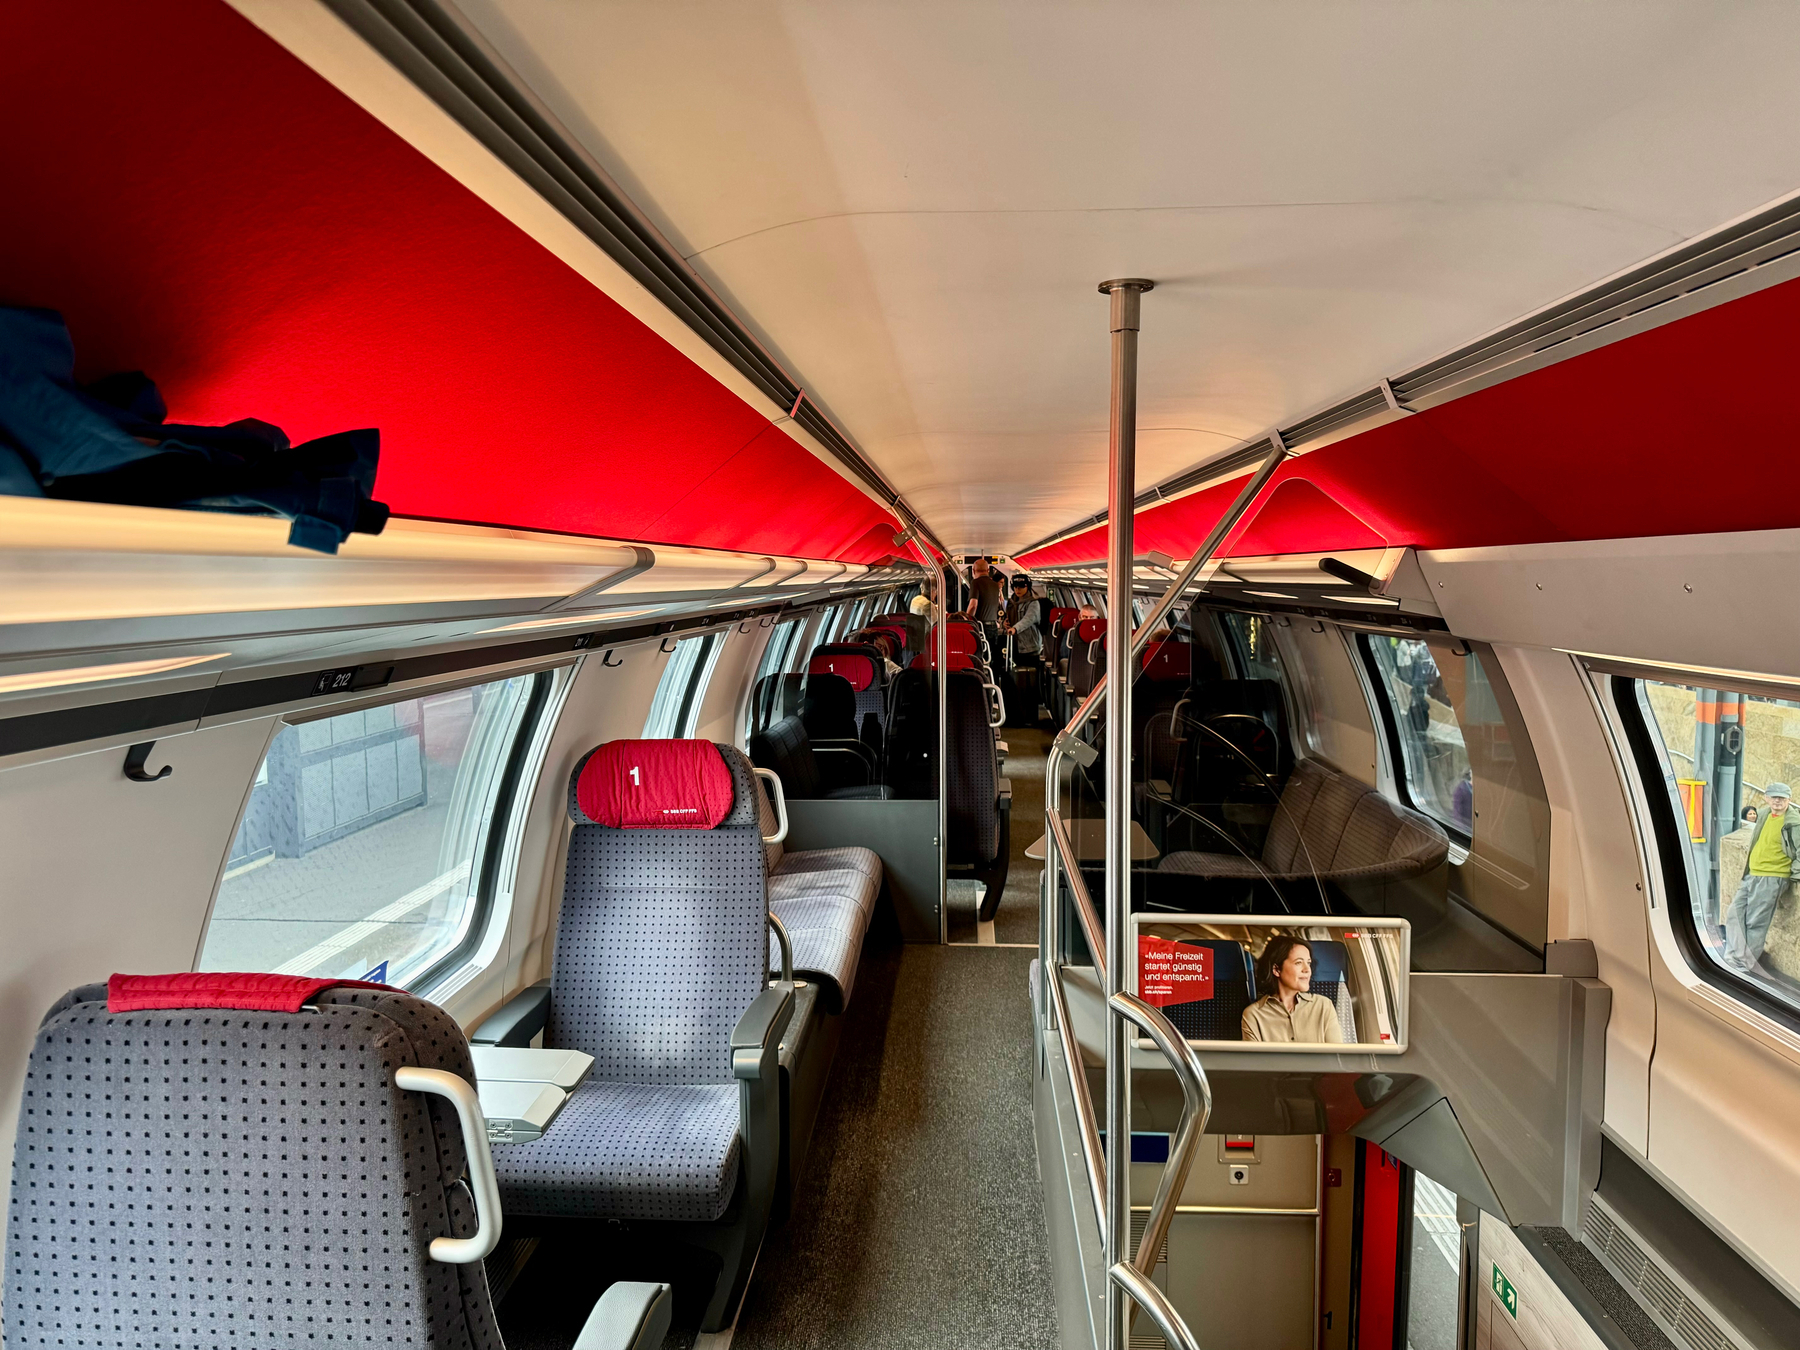 Interior of a modern train carriage with red and grey upholstery, overhead storage, and large windows. A television screen shows an advertisement. Passengers are by the door, and a worker is visible through the window.